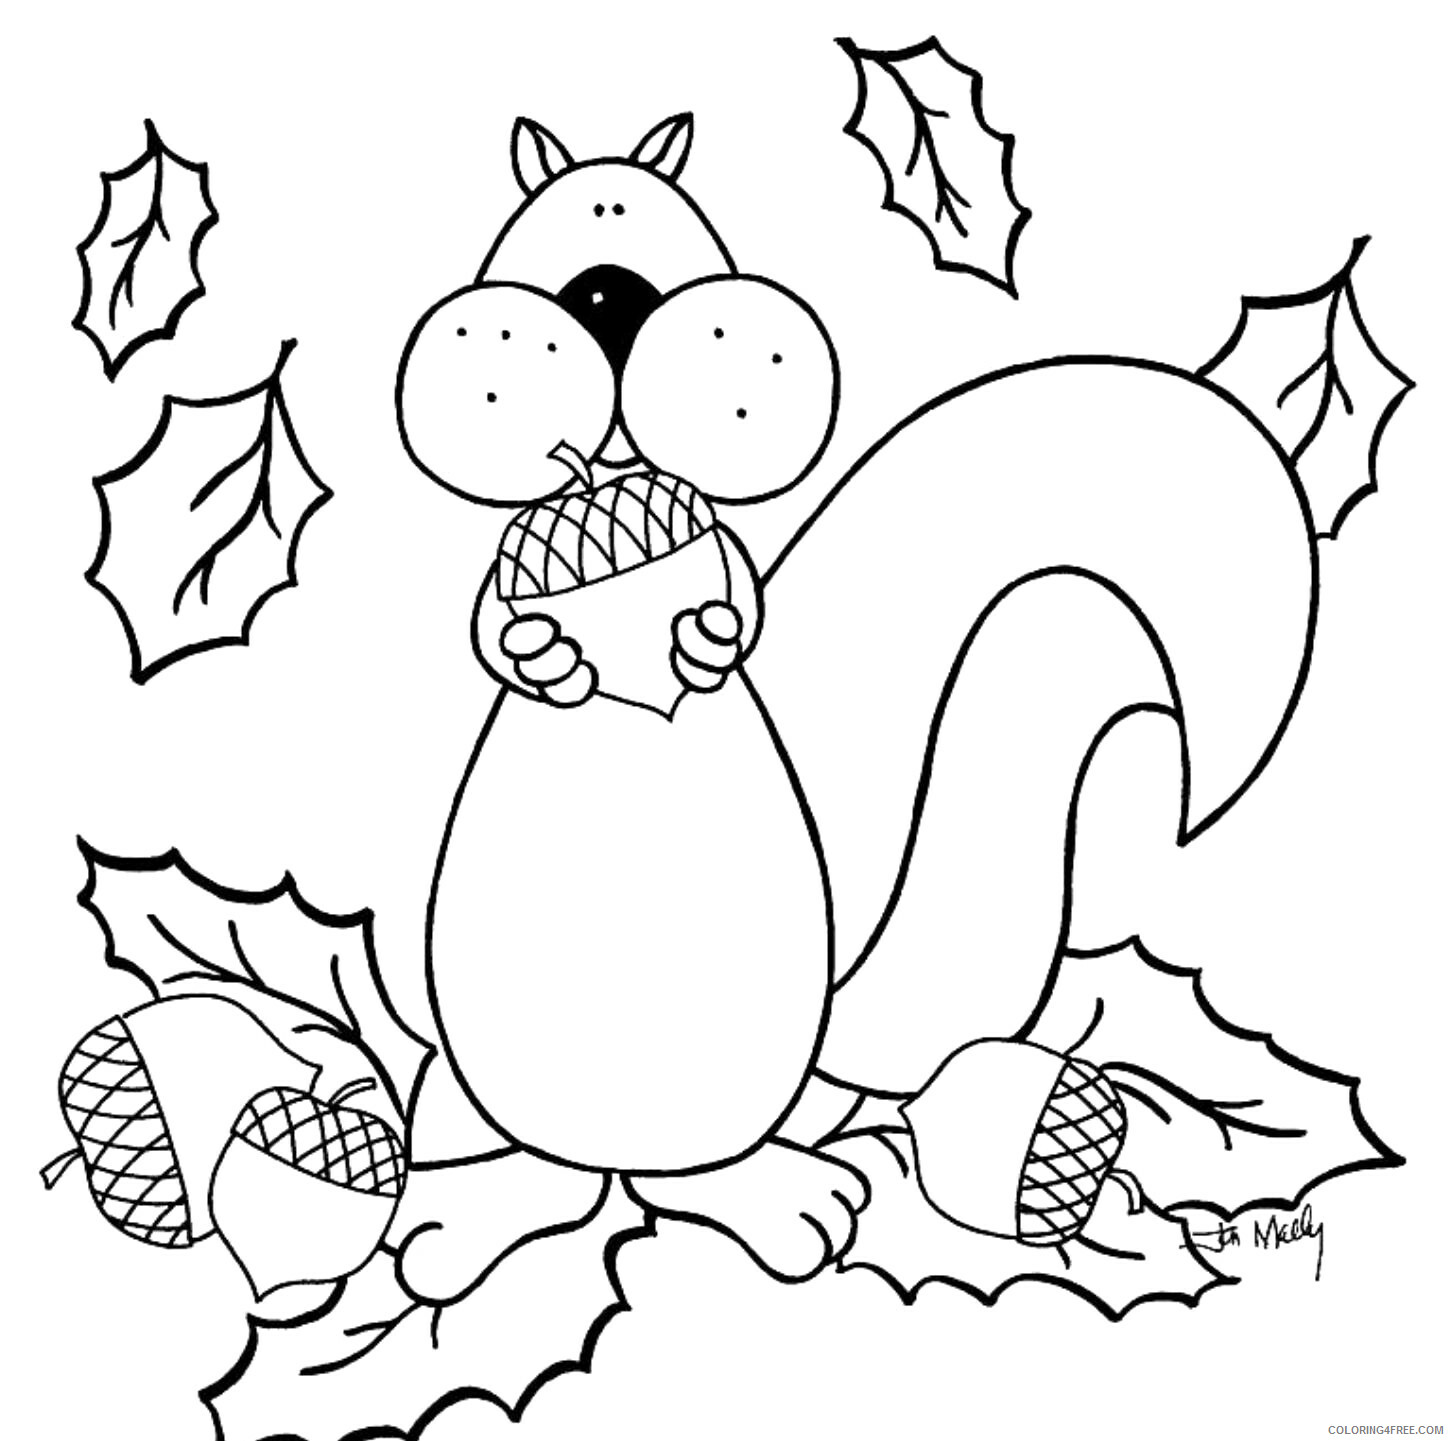 Squirrel Coloring Pages Animal Printable Sheets Collecting Nuts Fall 2021 Coloring4free